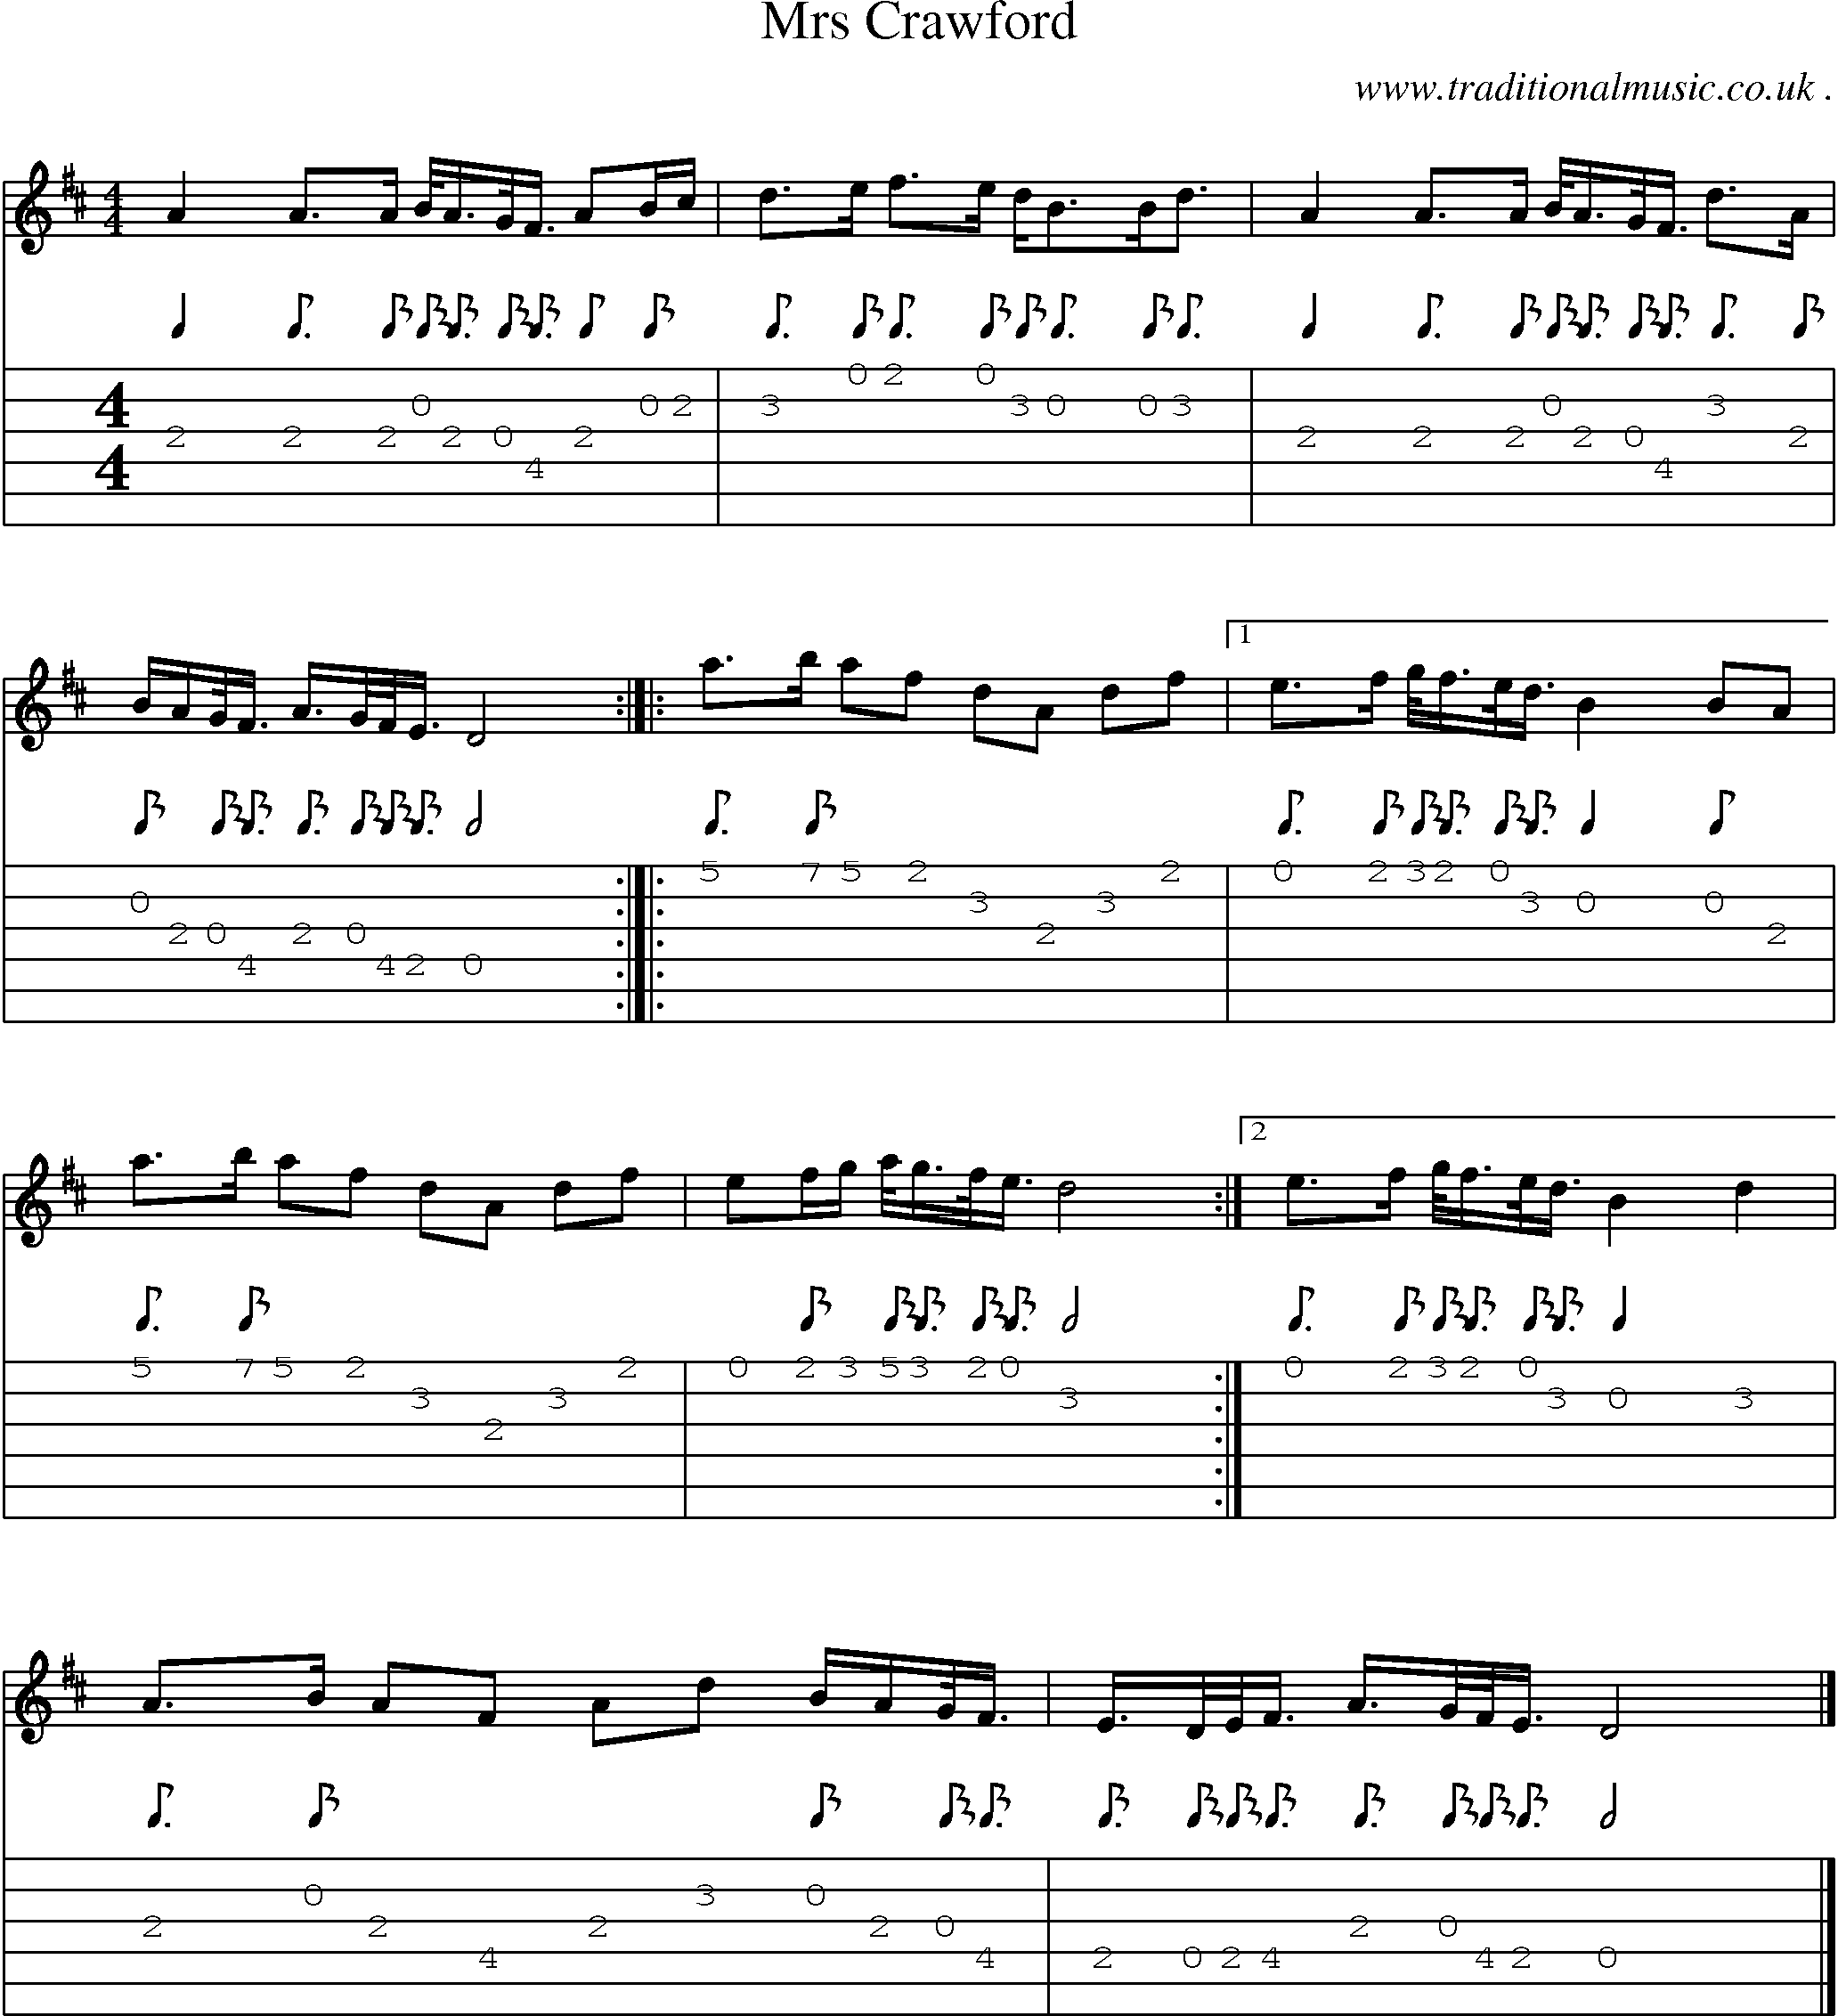 Sheet-music  score, Chords and Guitar Tabs for Mrs Crawford